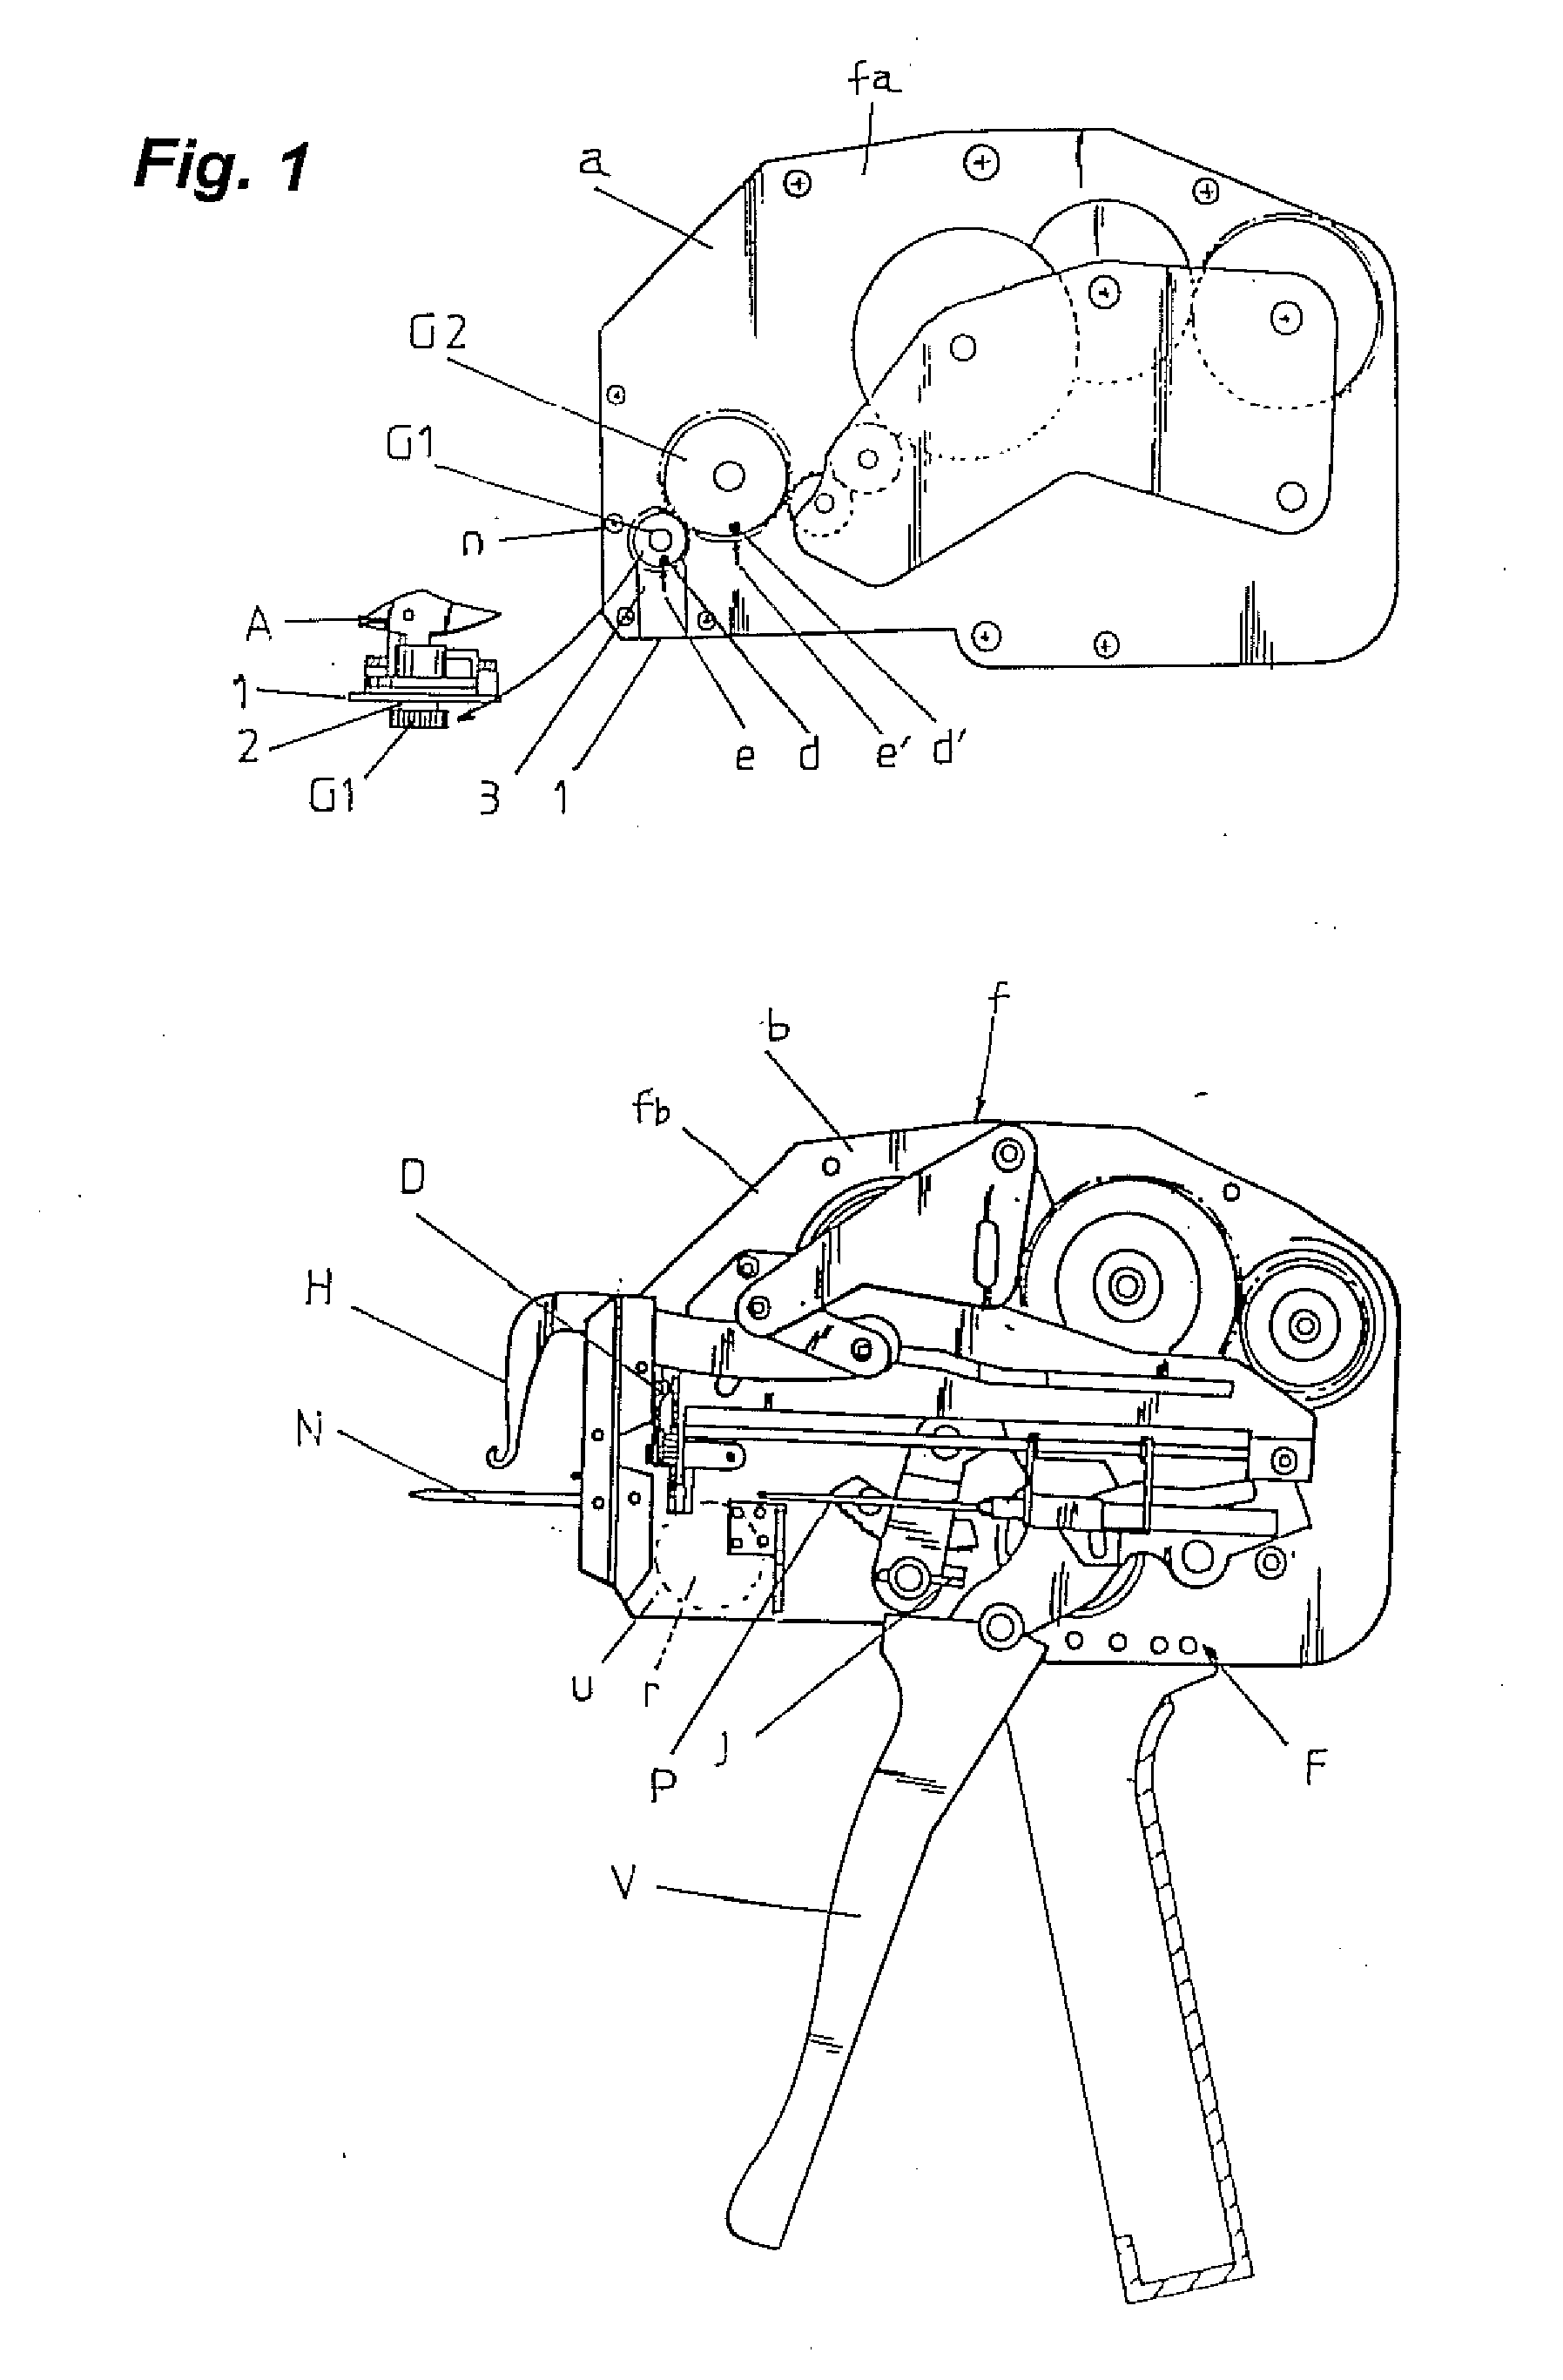 Apparatus for replacing a knotter in a tag fastener